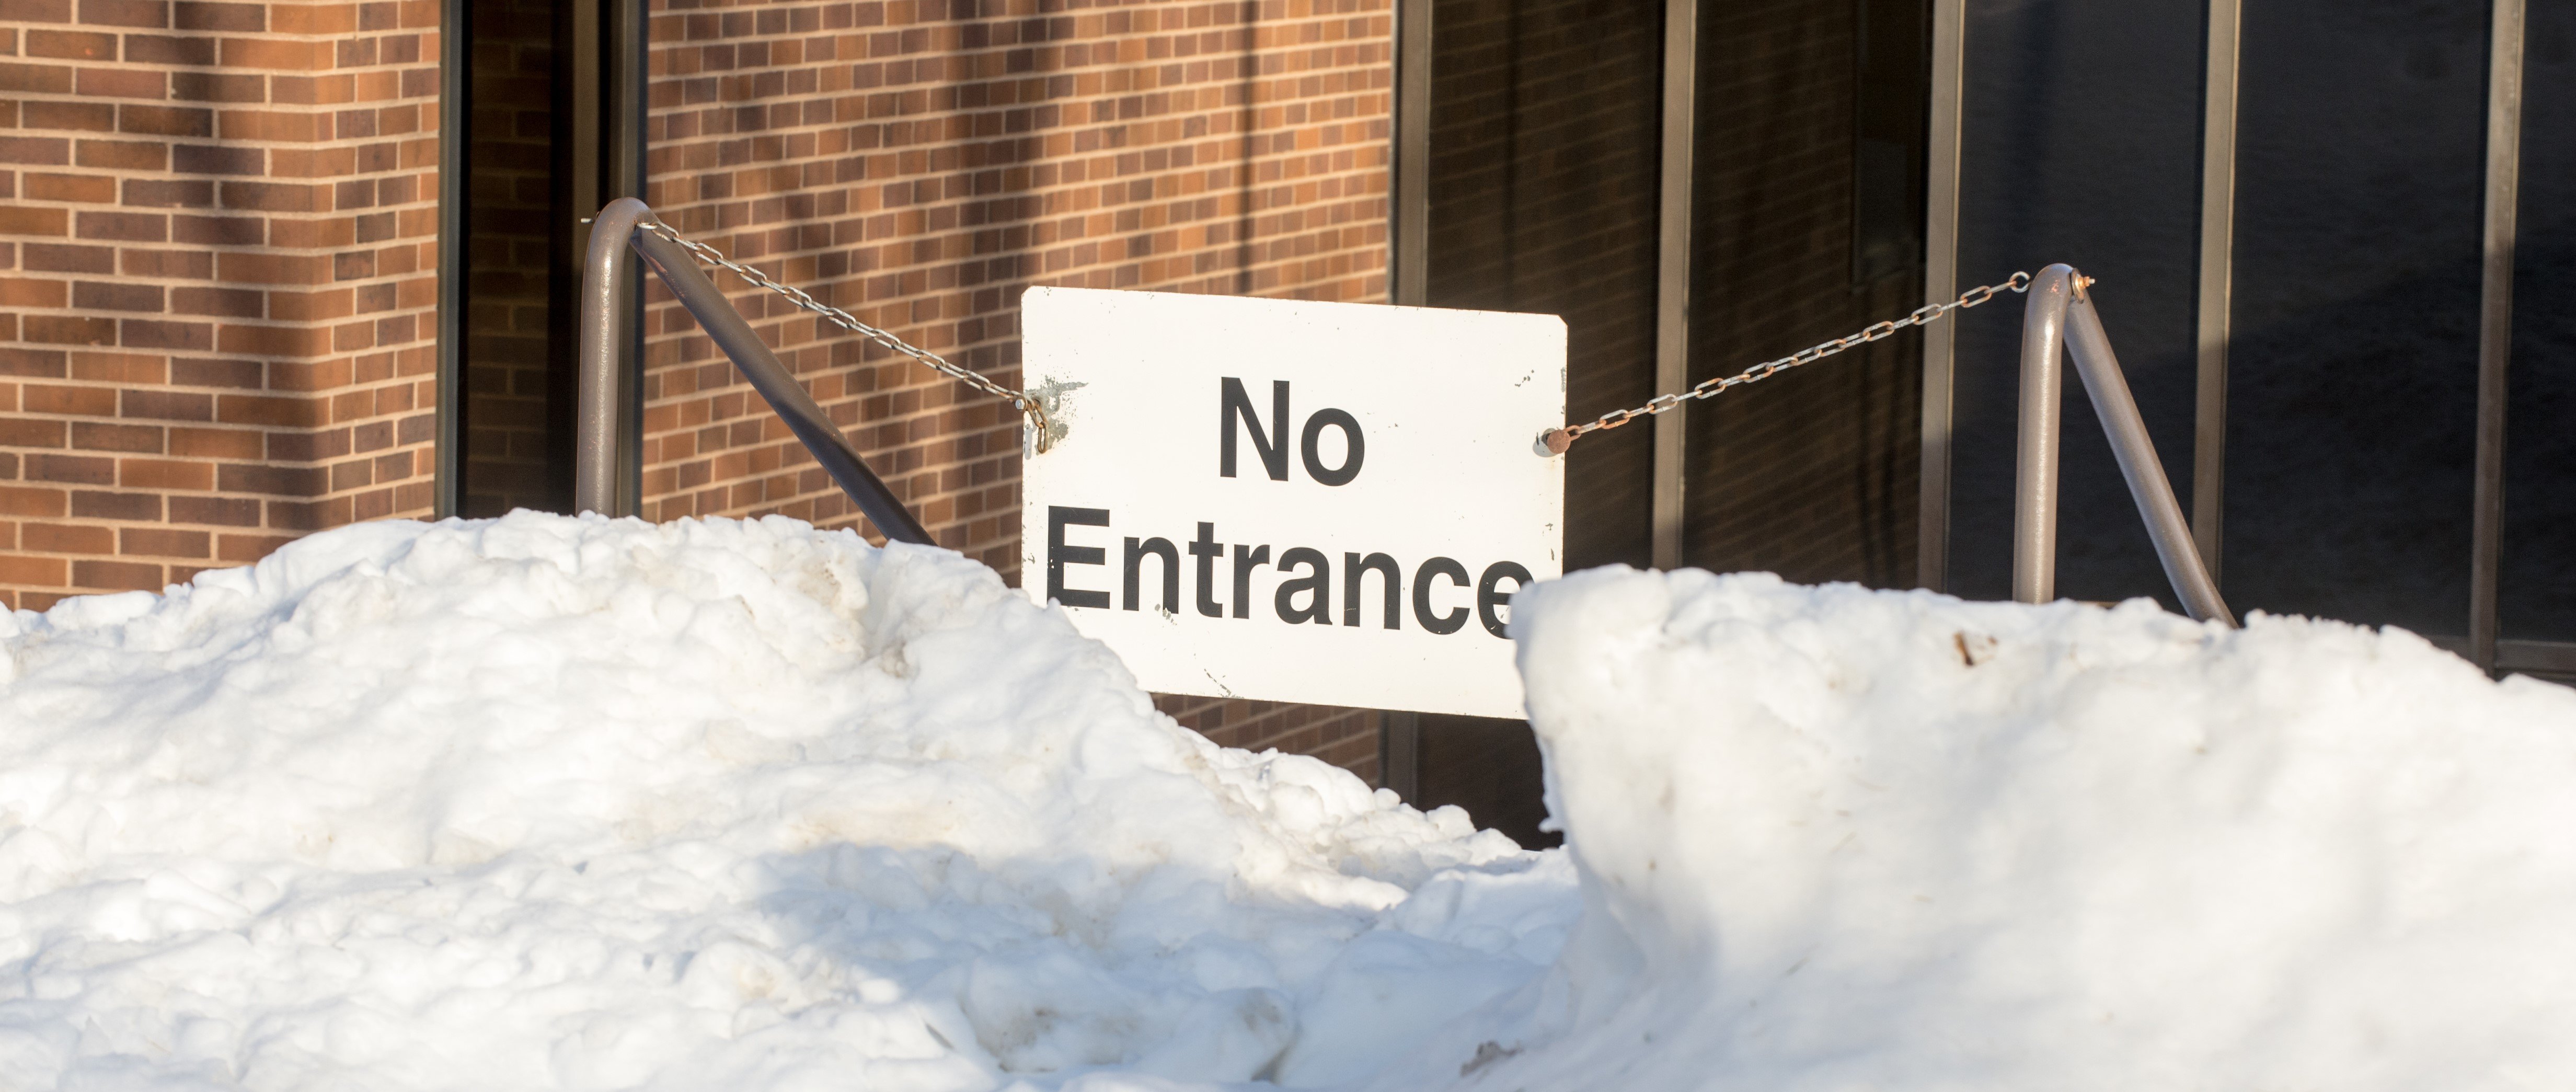 A sign reading No Entrance is chained across the top of an outdoor staircase blocked with snow